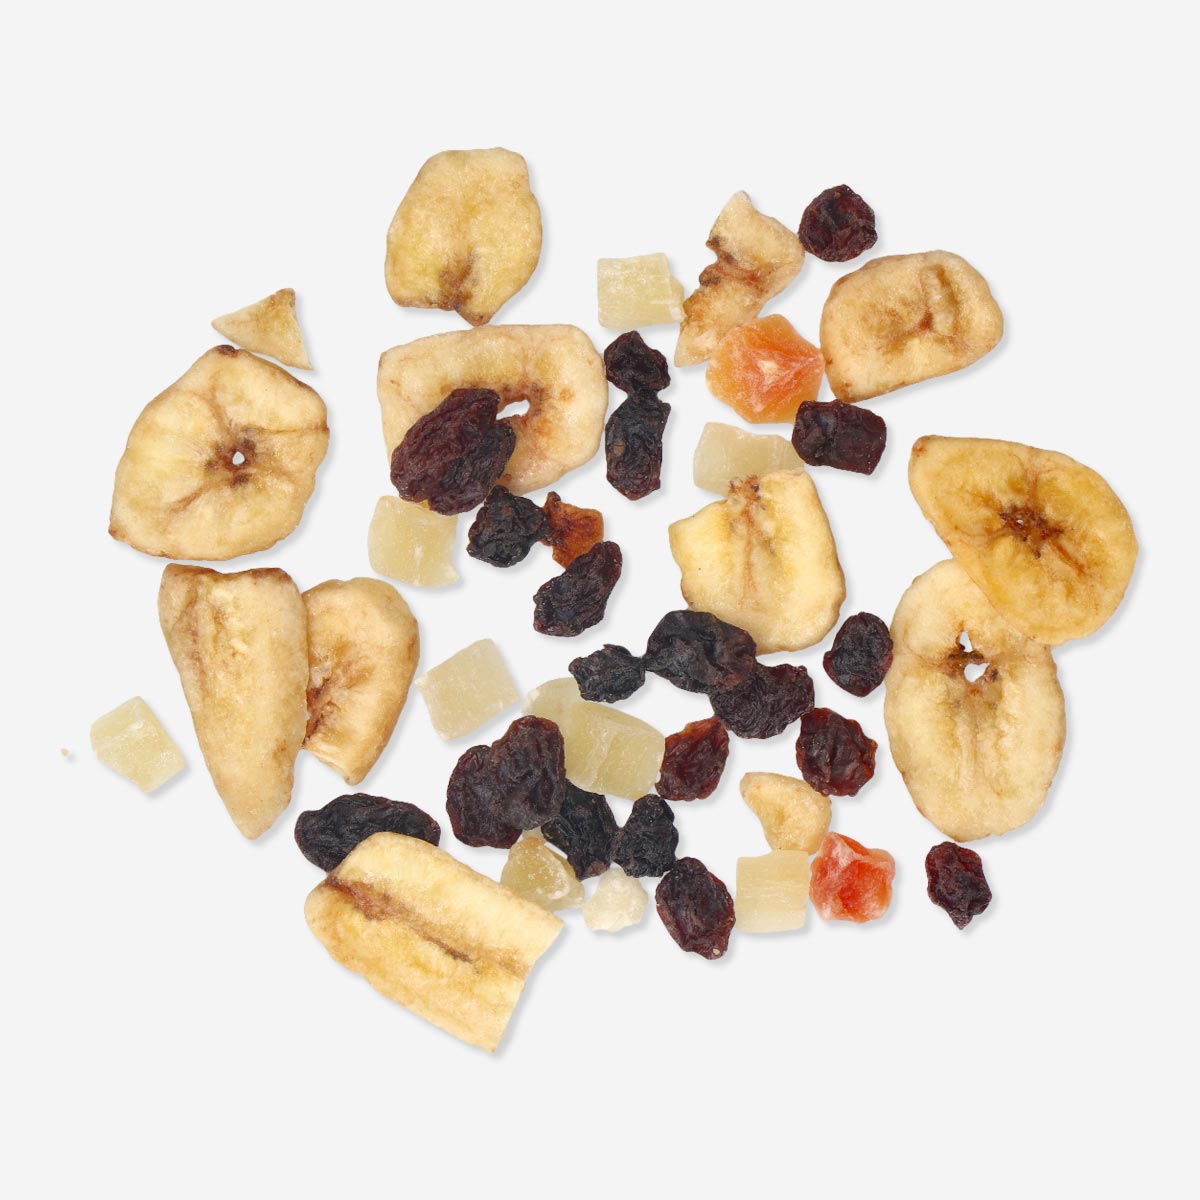 Dried fruit & nuts